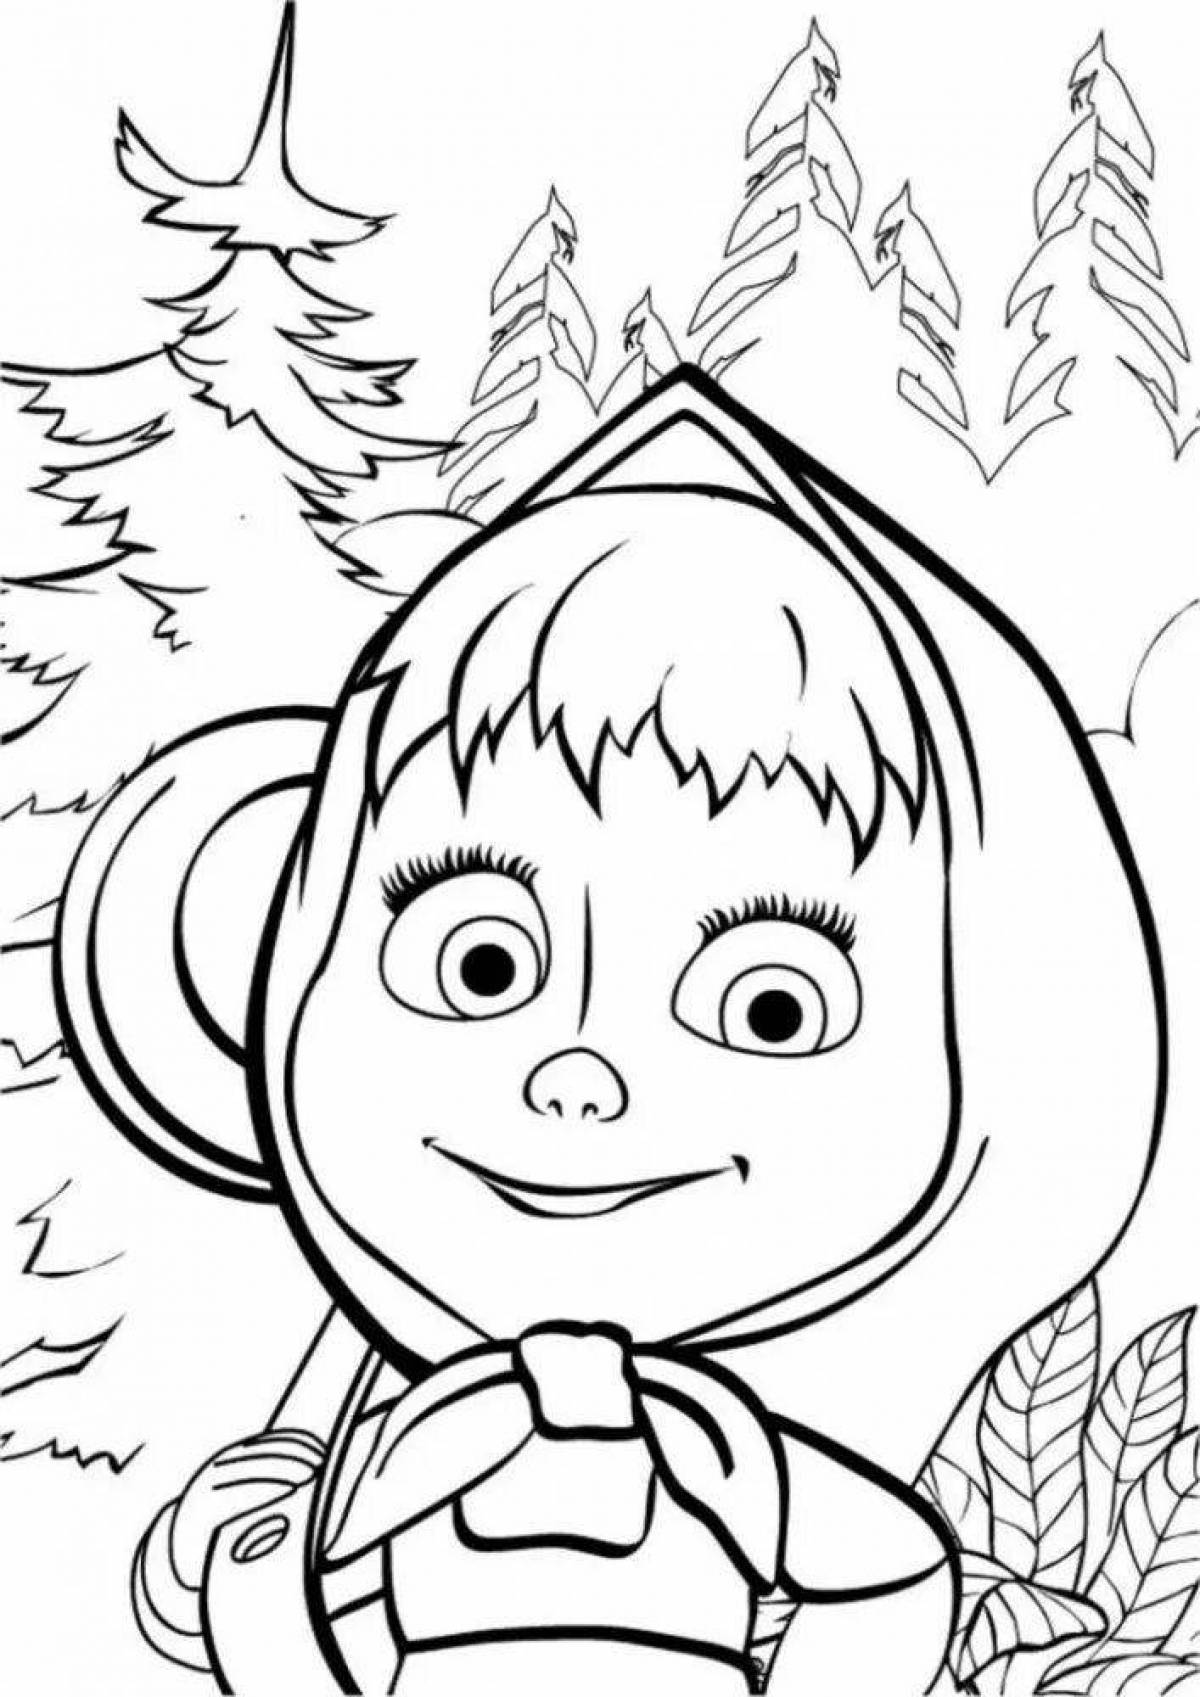 Amazing coloring pages Masha and the bear